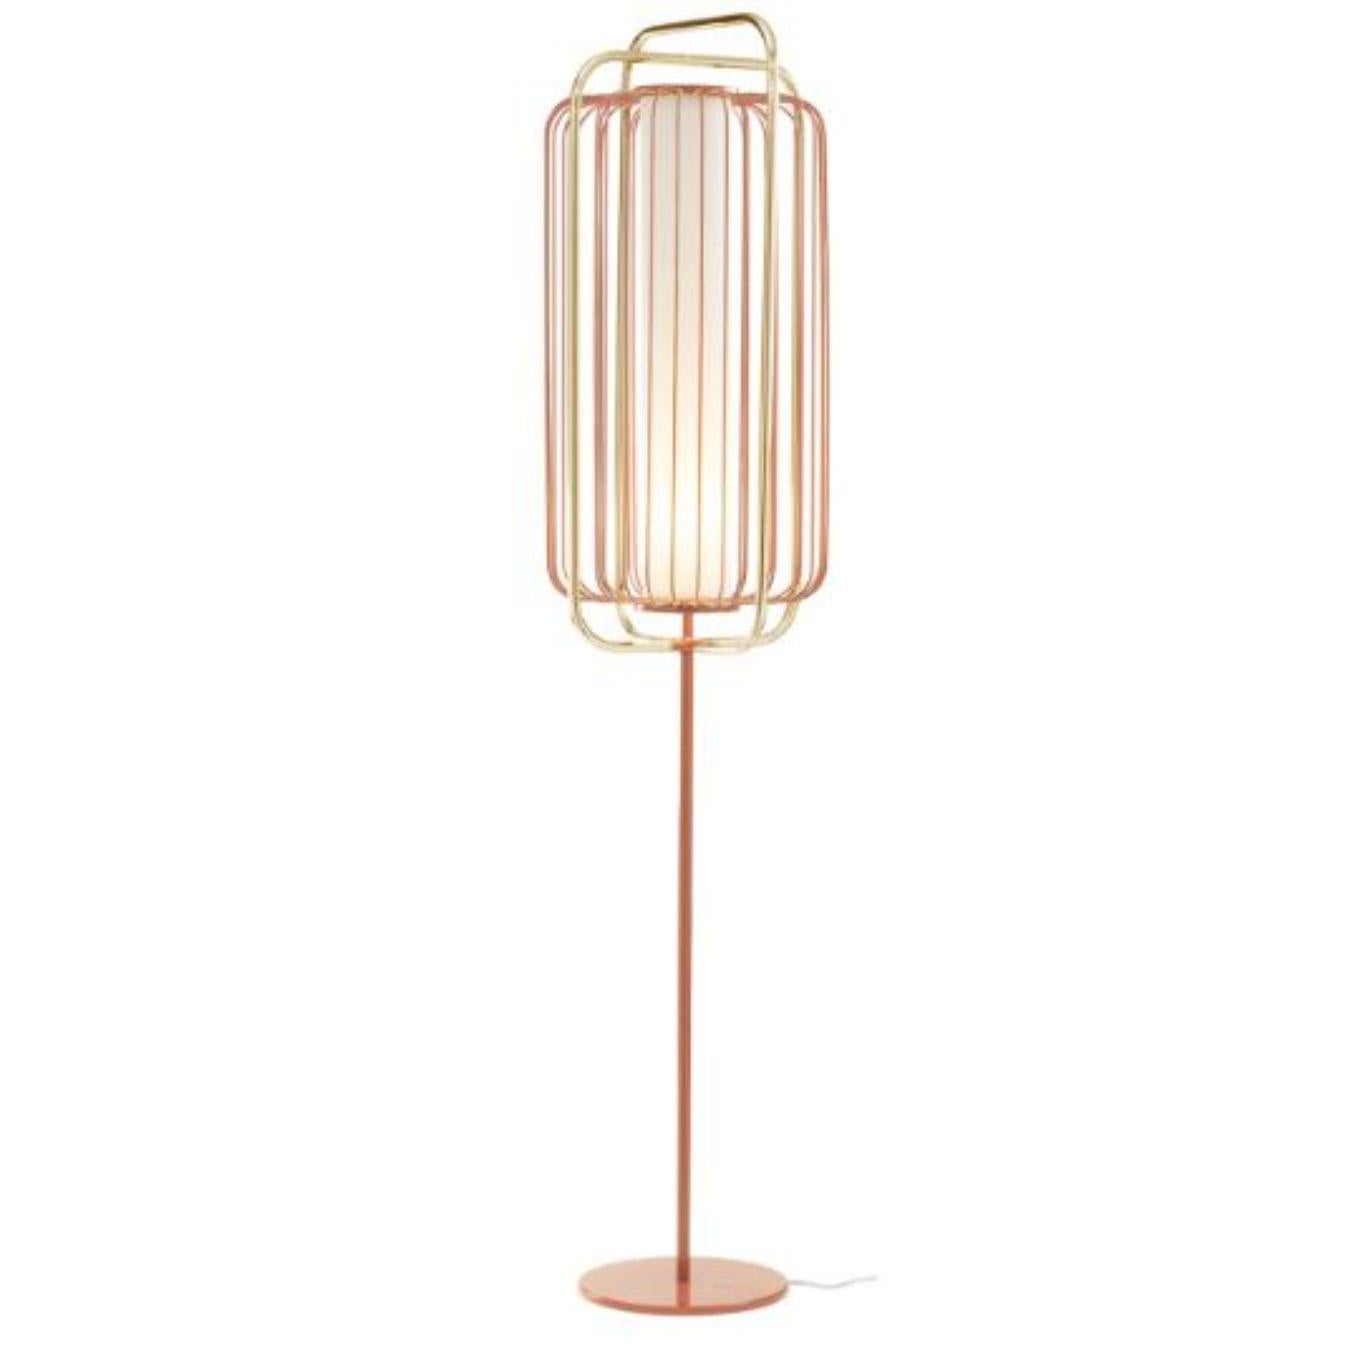 Brass and Salmon Jules floor lamp by Dooq.
Dimensions: W 38 x D 38 x H 177 cm
Materials: lacquered metal, polished or brushed metal, brass.
abat-jour: cotton
Also available in different colours and